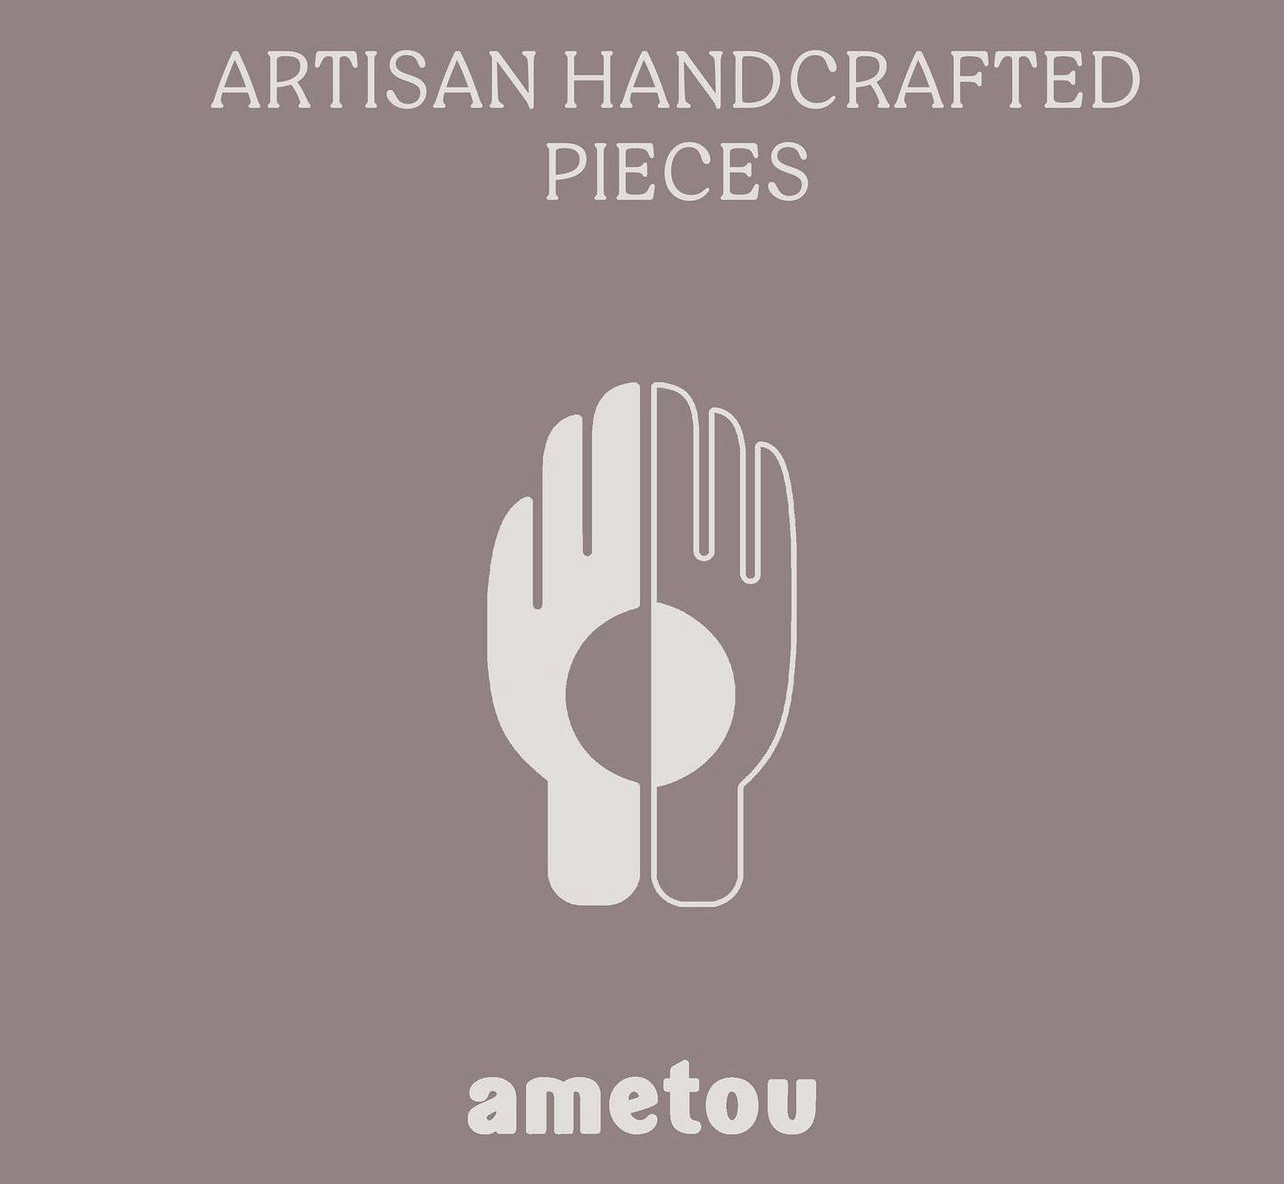 The logo of Ametou, a sustainable fashion brand known for its artisan handcrafted pieces.